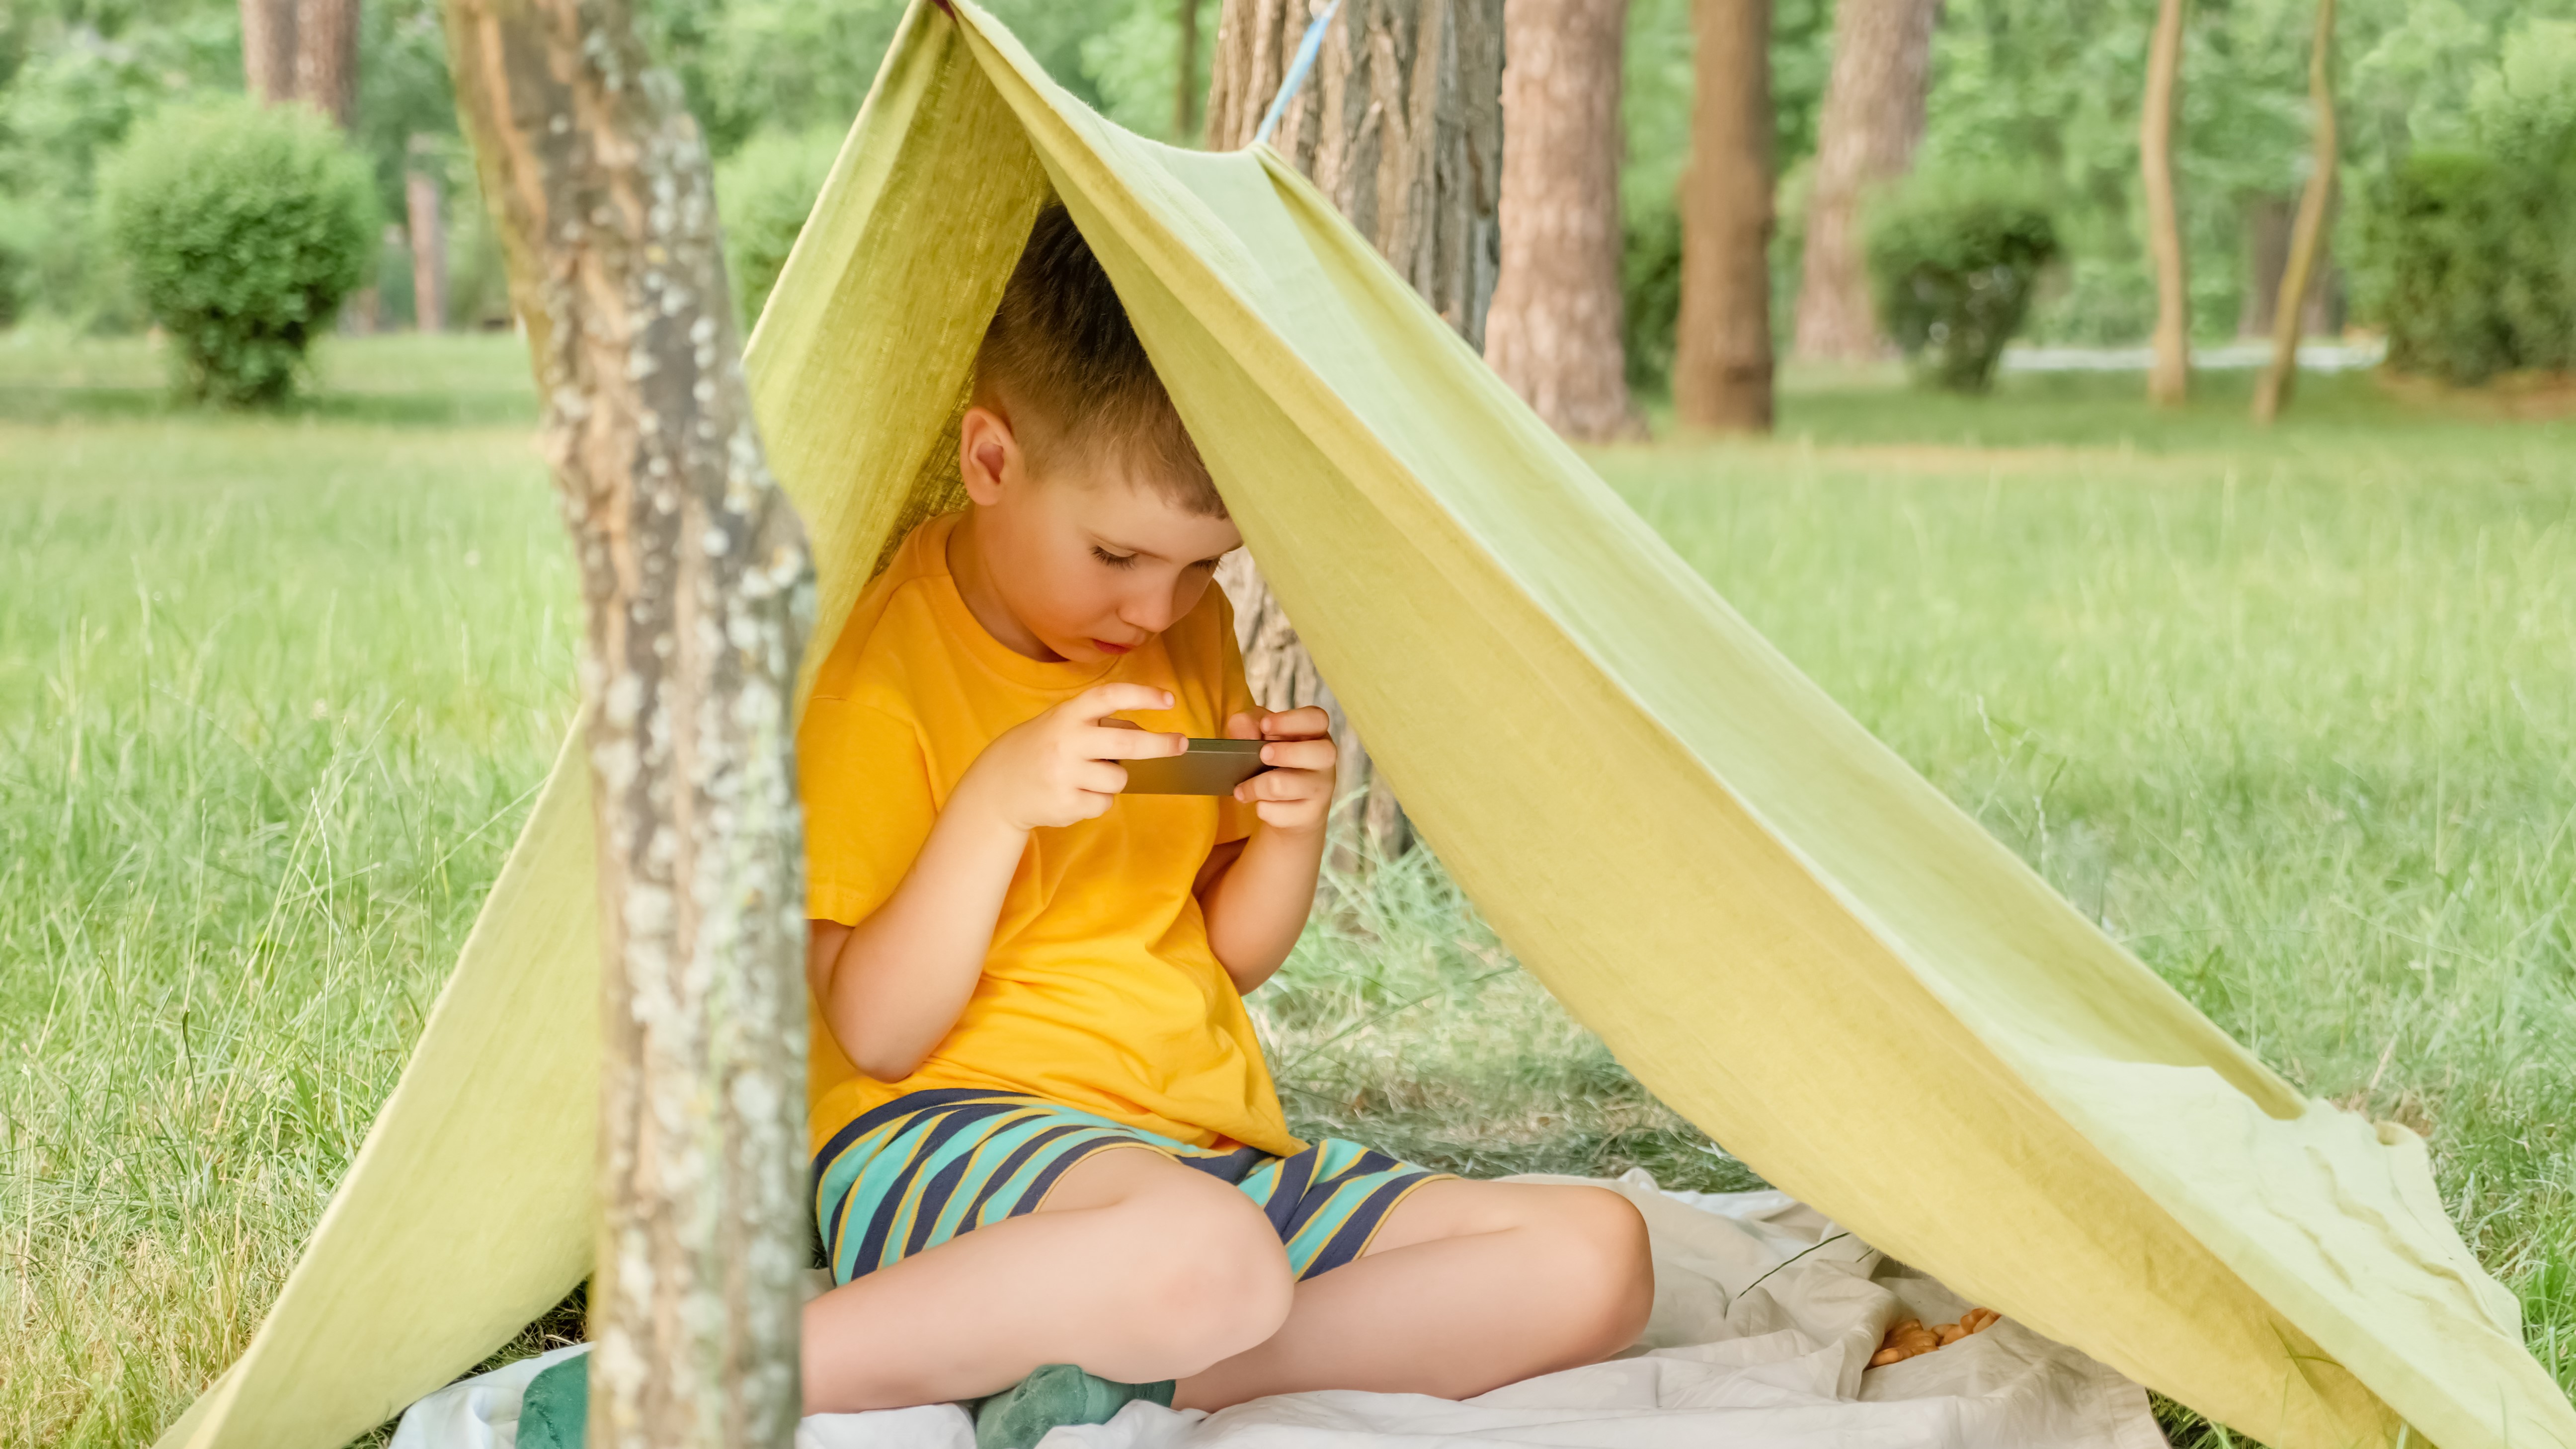 A small child watching Netflix on his phone while sitting in a makeshift tent in the woods